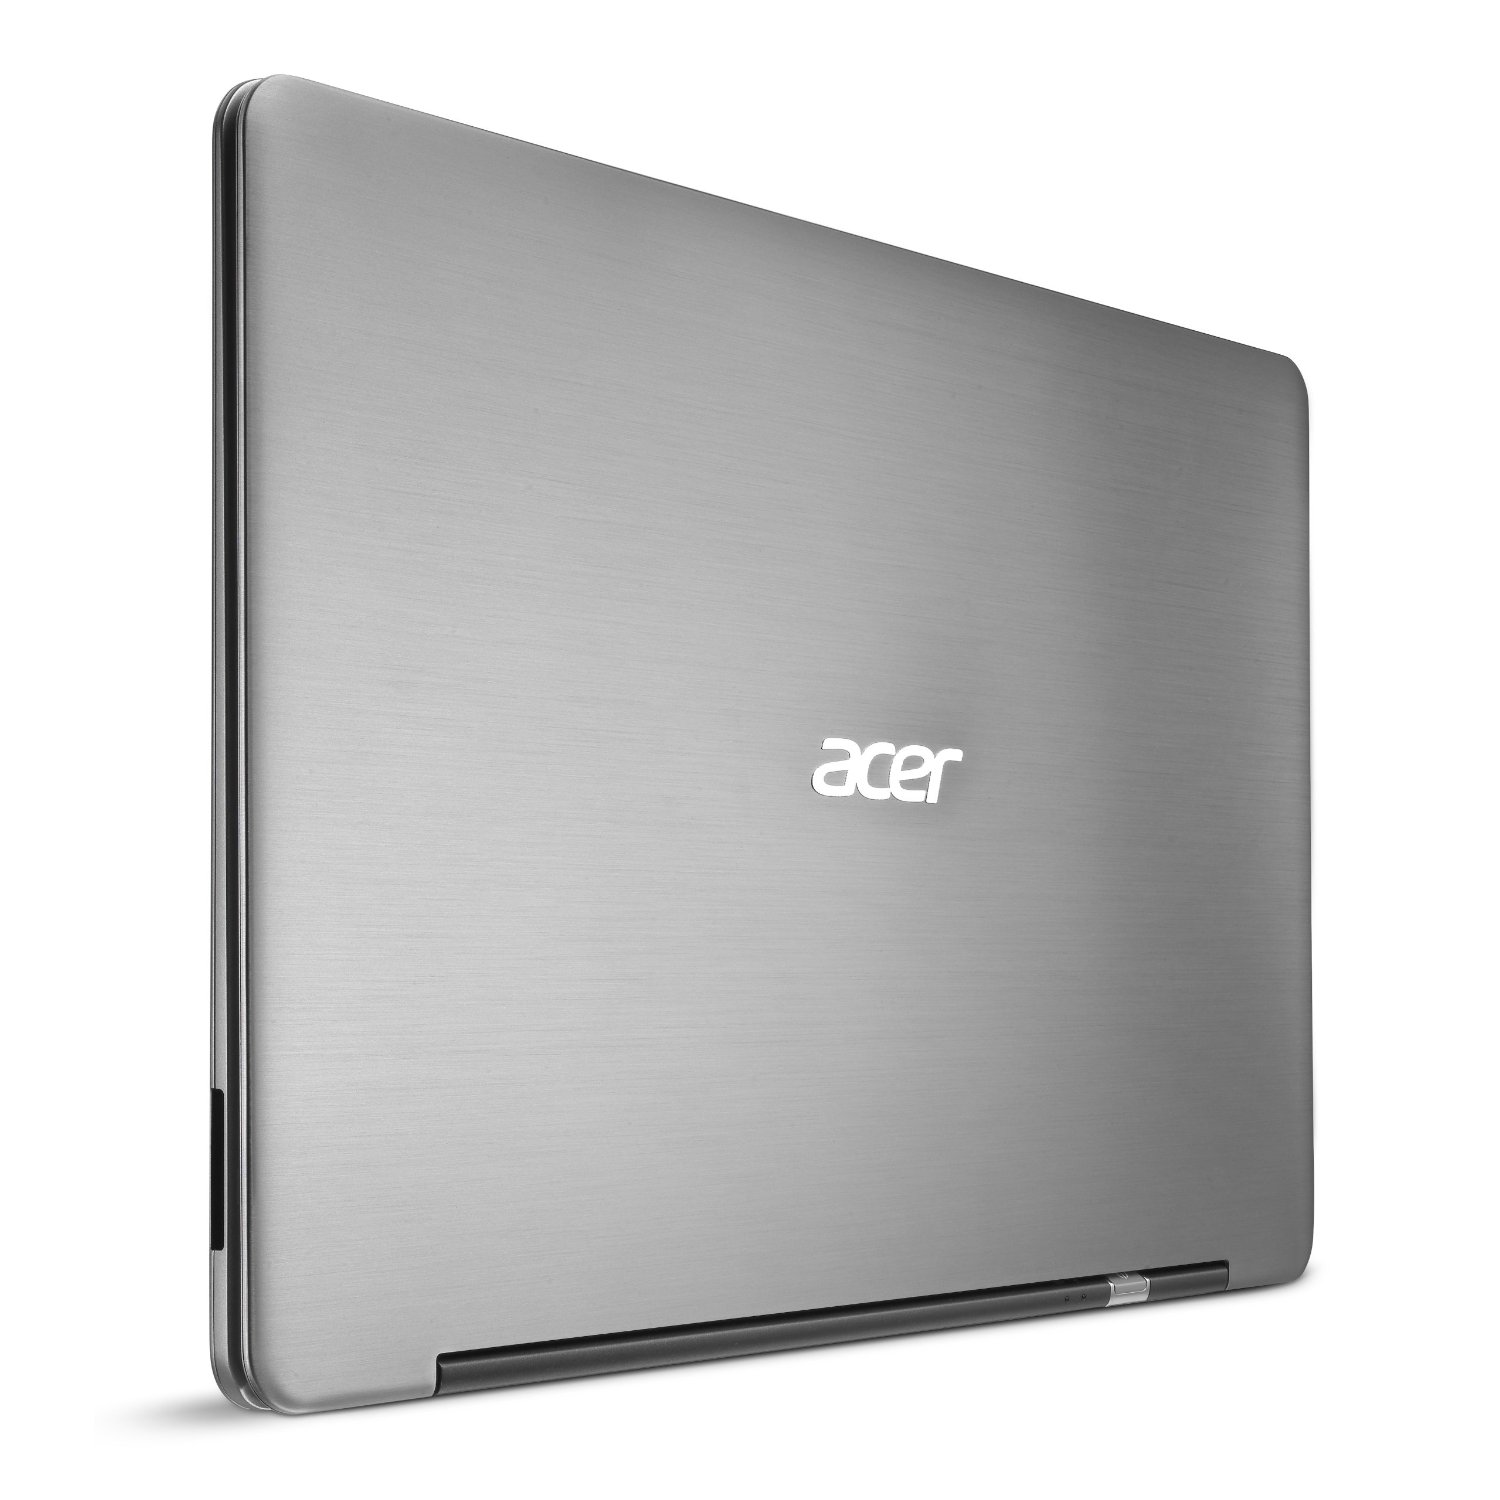 http://thetechjournal.com/wp-content/uploads/images/1204/1335733207-acers-new-aspire-s3-133inch-hd-display-ultrabook-7.jpg